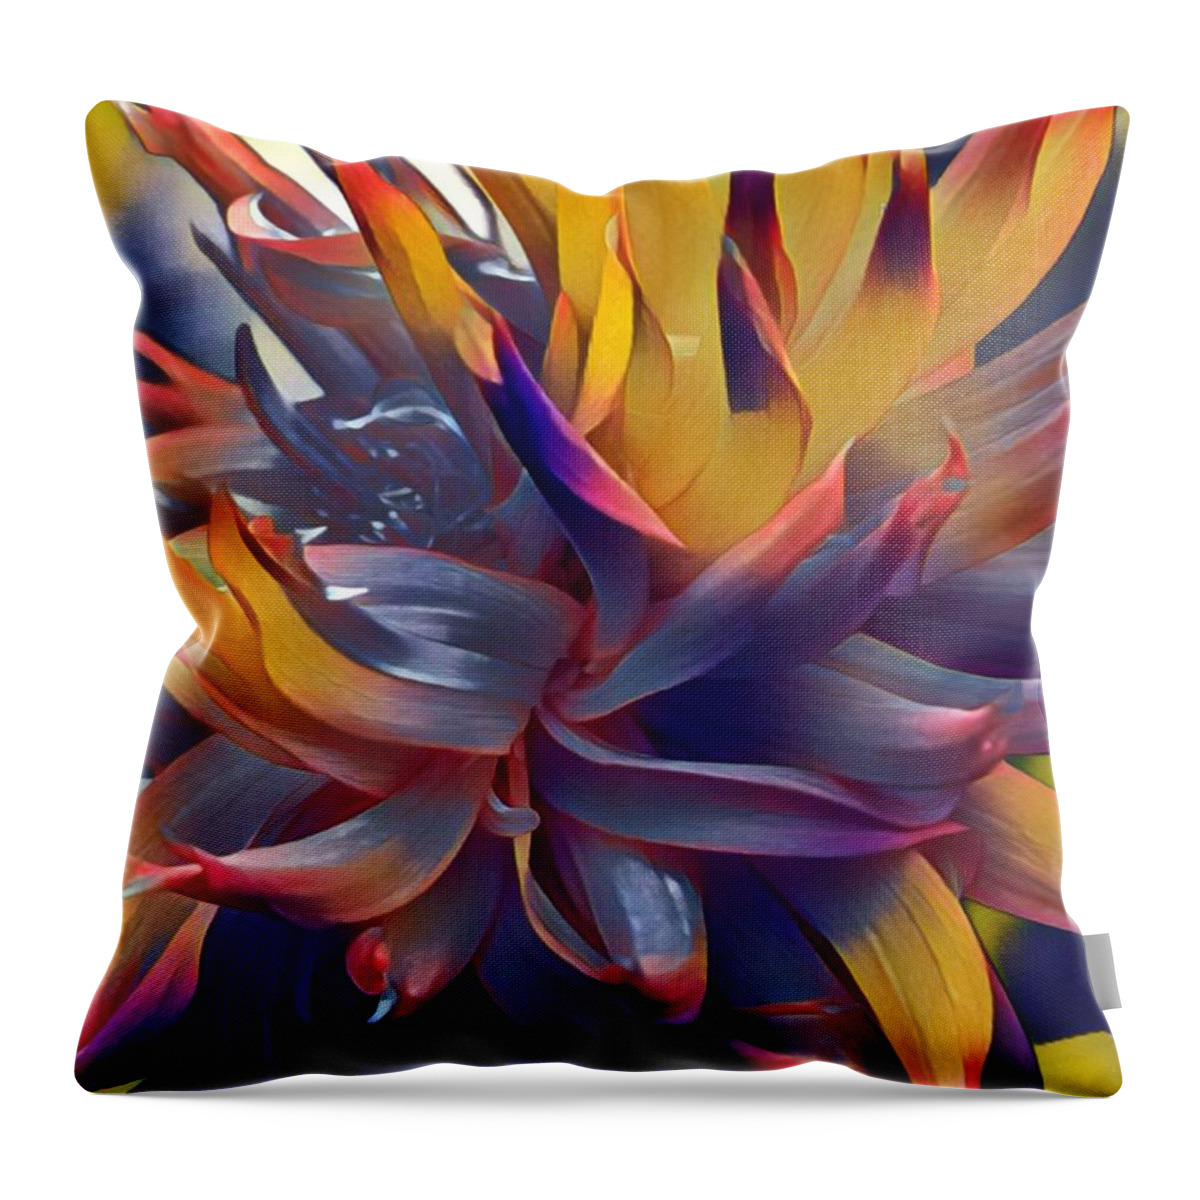 Floral Throw Pillow featuring the mixed media Flower Power by Susan Rydberg